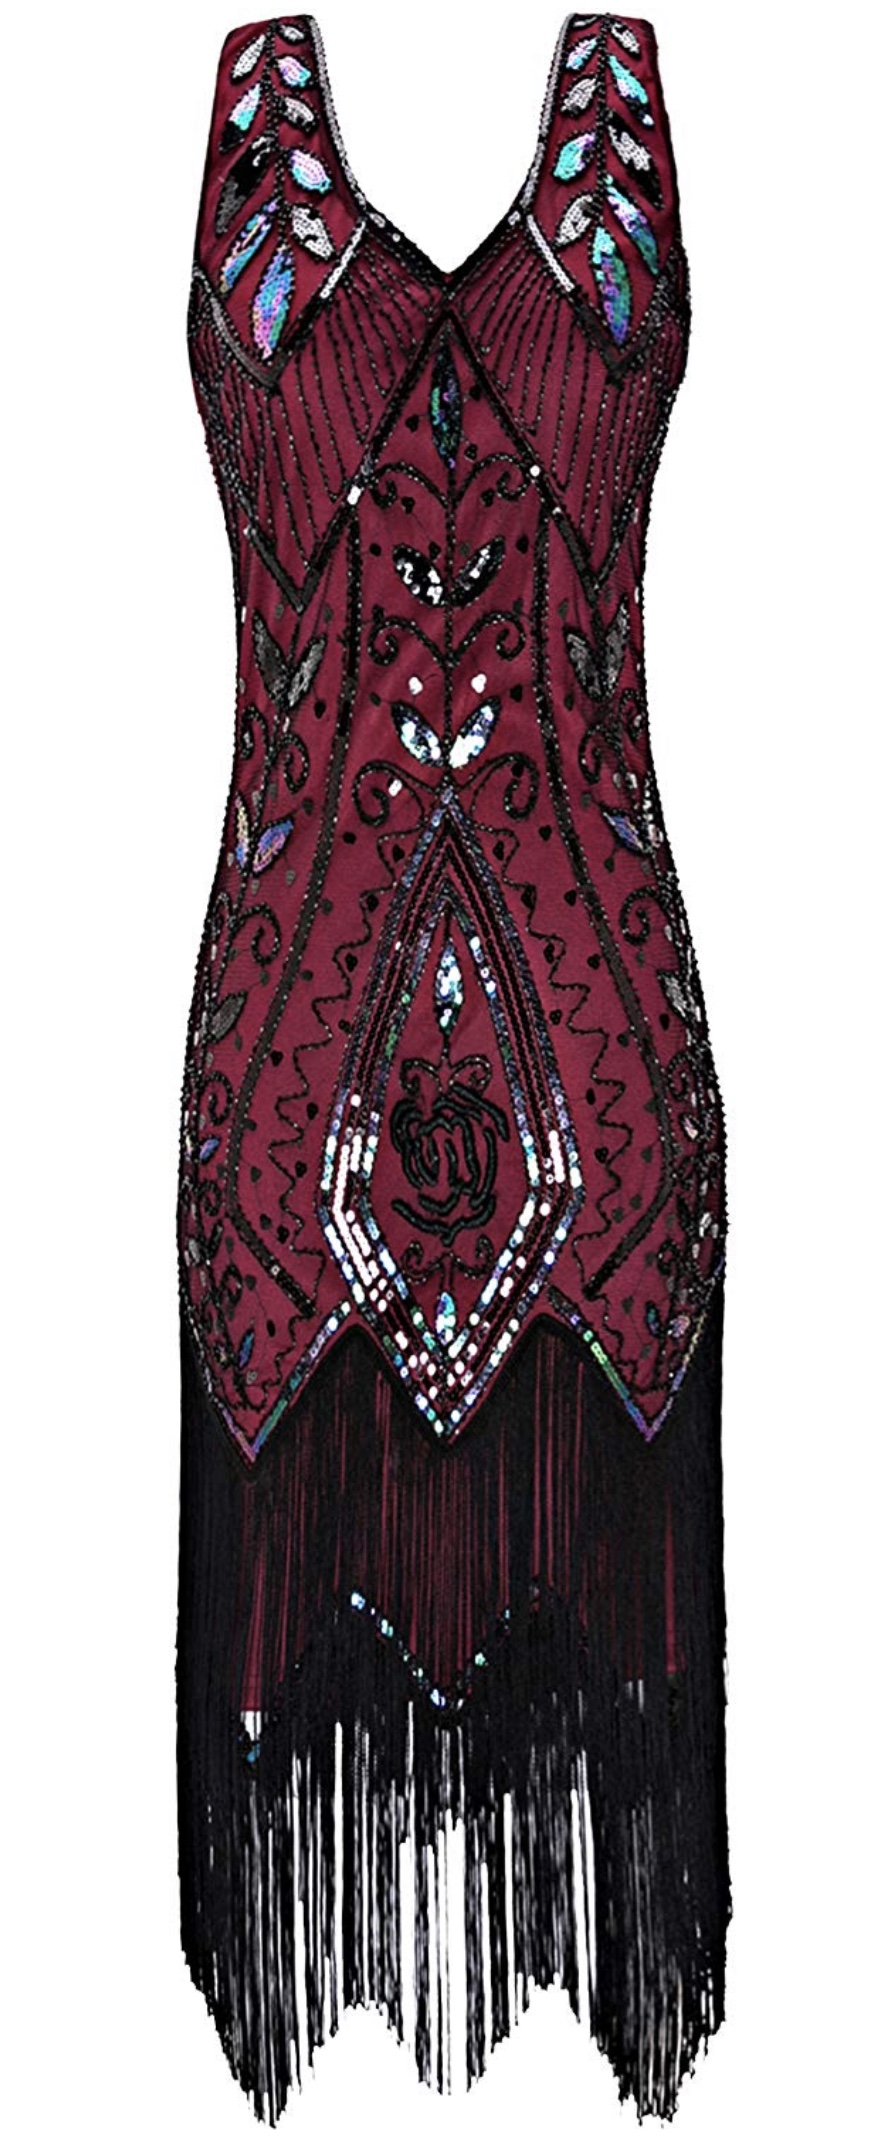 Black and Red 1920s Flapper Cocktail Dress